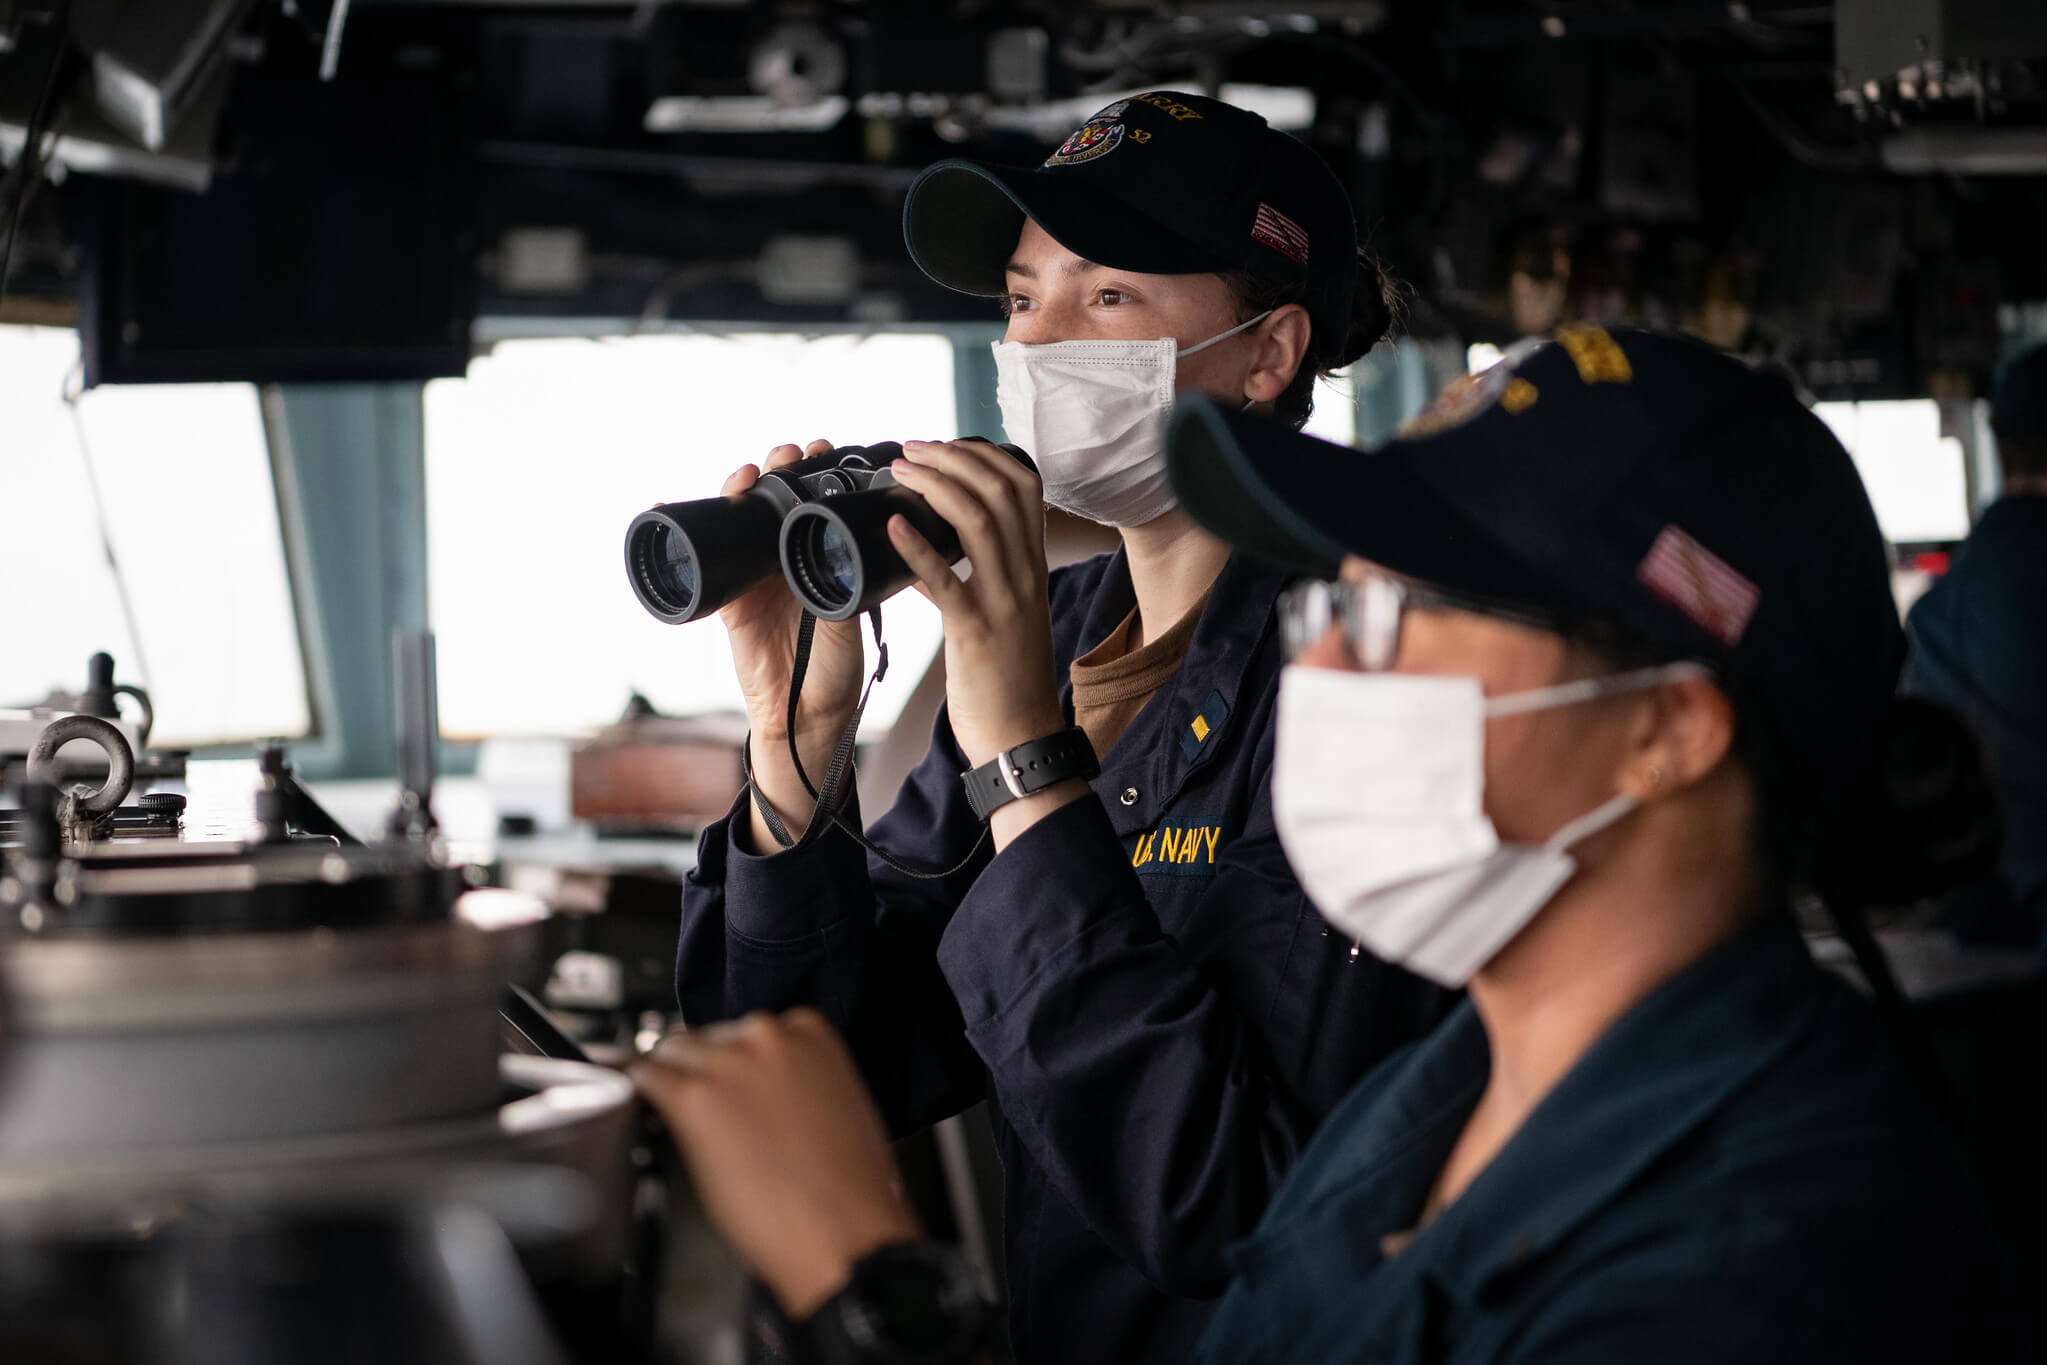 iChung-Lai - the bridge of the guided-missile destroyer USS Barry (DDG 62) as the ship conducts routine underway operations in the Taiwan Strait in November 2020. U.S. Pacific Fleet